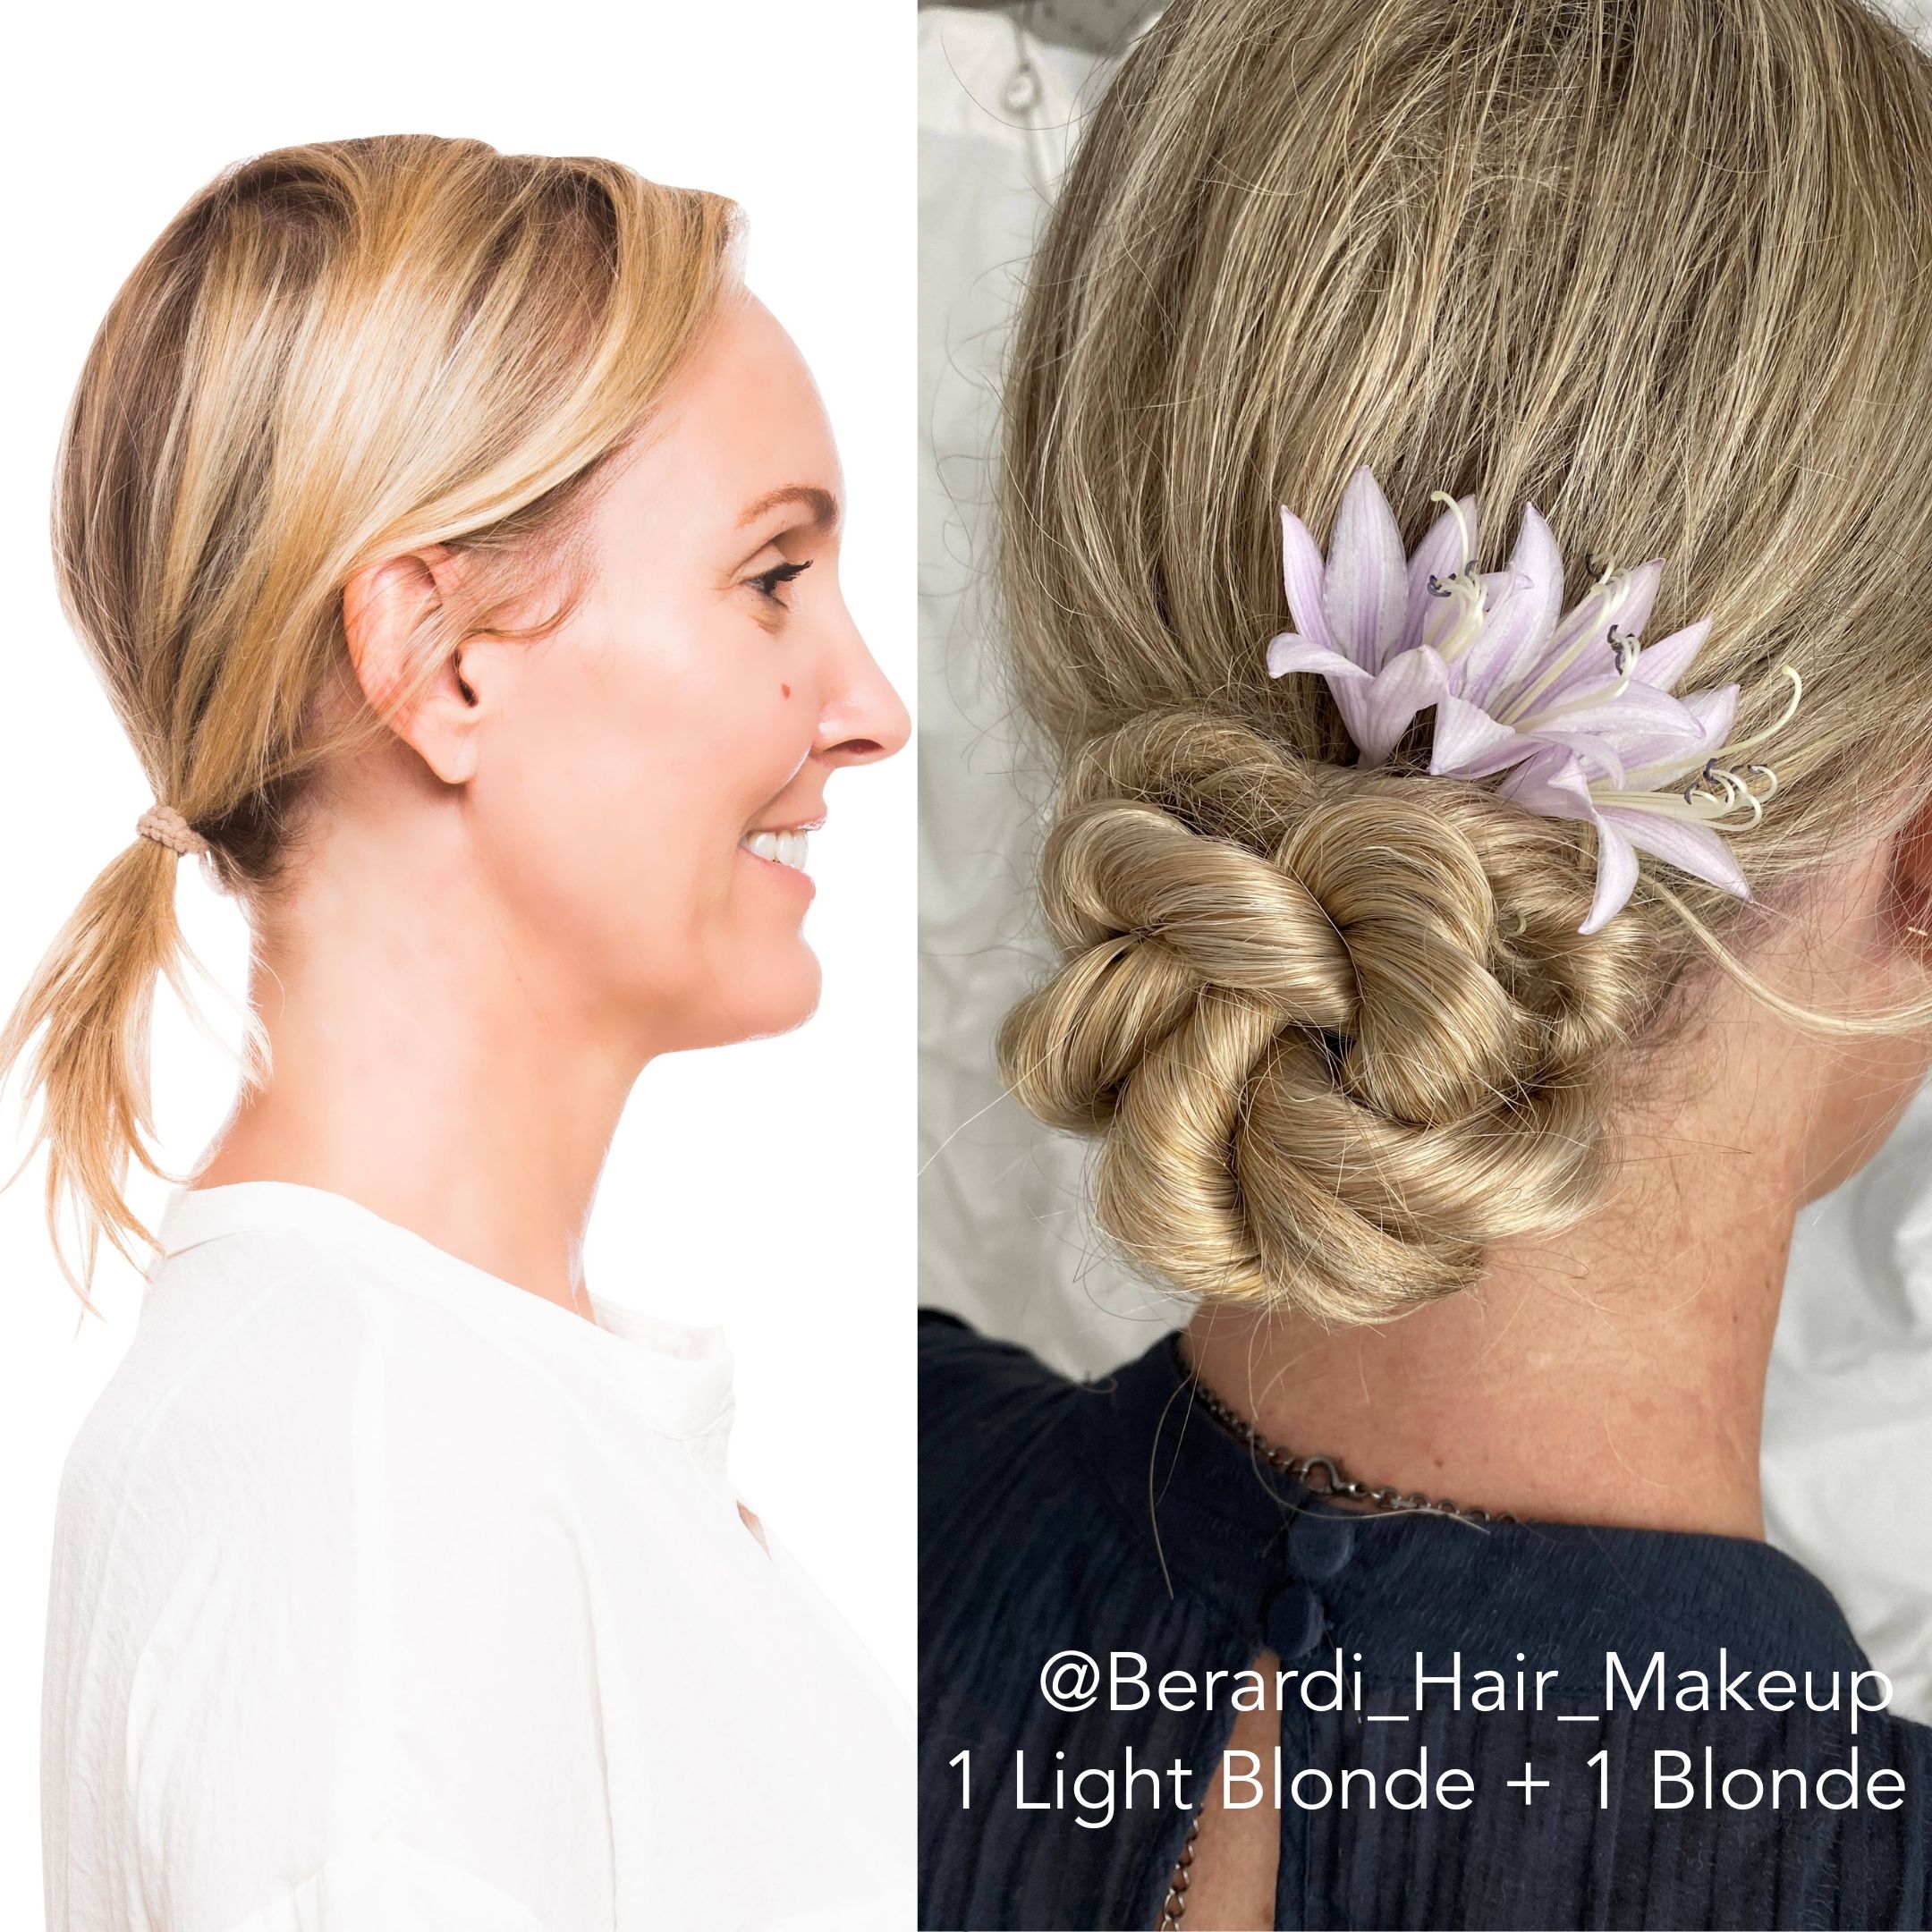 Blonde Easy Updo Extensions Natural Looking Style, Volume & Length